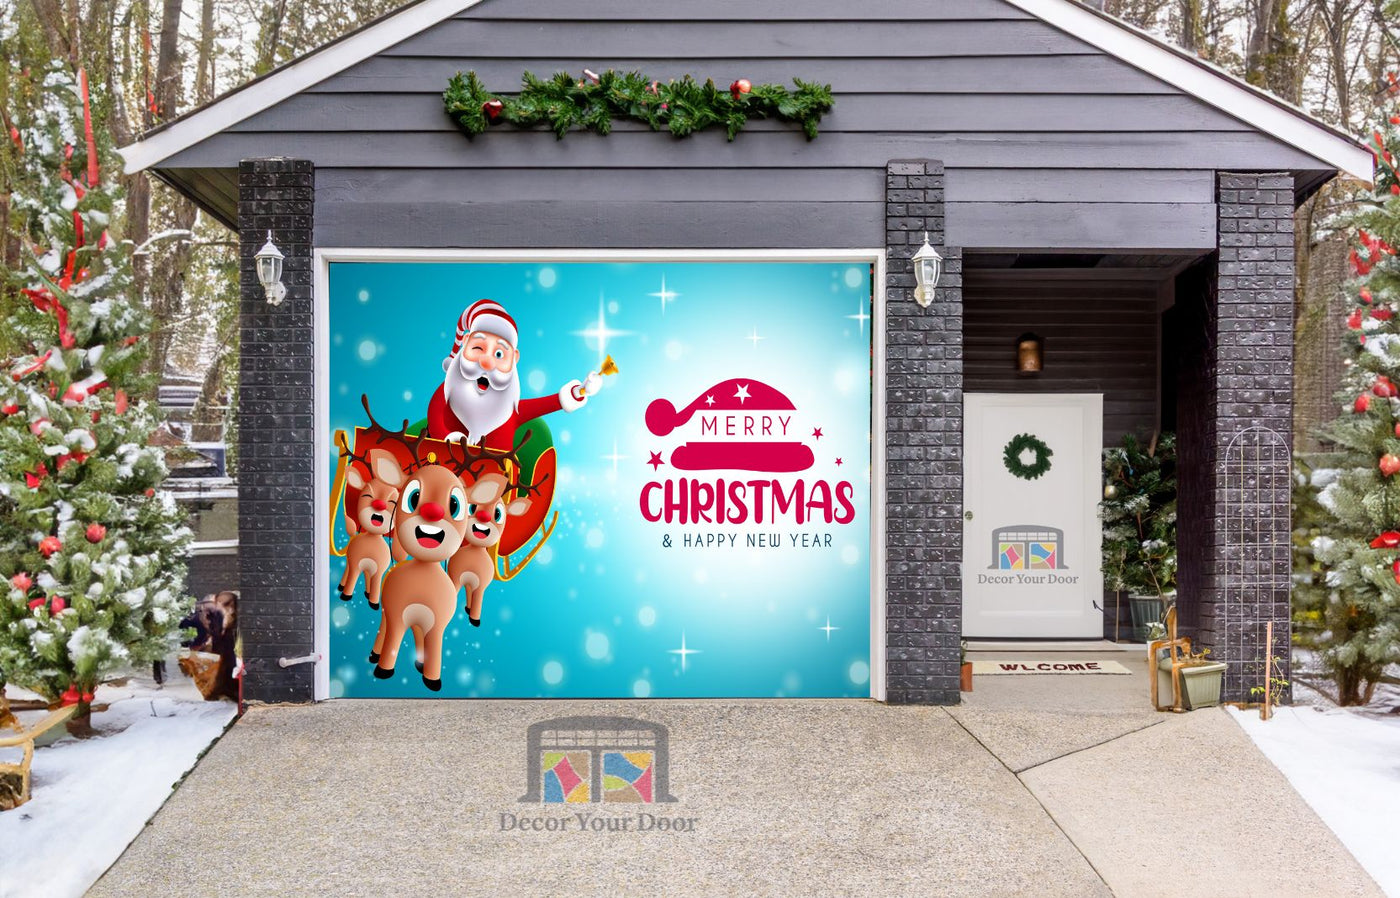 Merry Christmas And Happy New Year With Reindeer And Santa Claus Garage Door Wrap Cover Mural Decoration